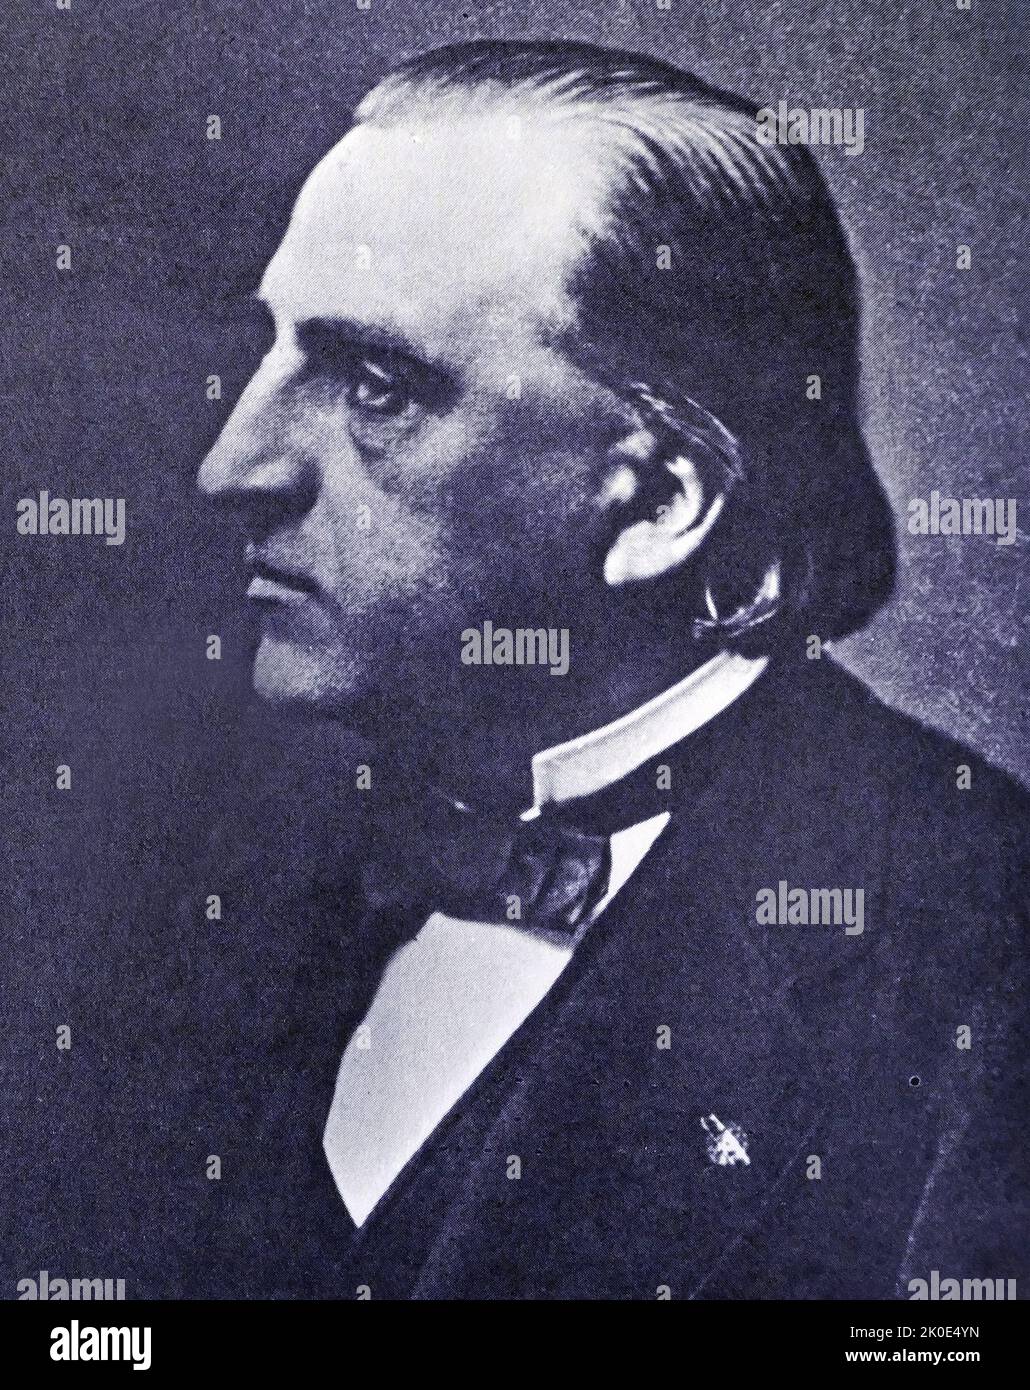 Jean-Martin Charcot (1825 - 1893) French neurologist and professor of anatomical pathology. He is best known today for his work on hypnosis and hysteria. Charcot is known as 'the founder of modern neurology'. Stock Photo